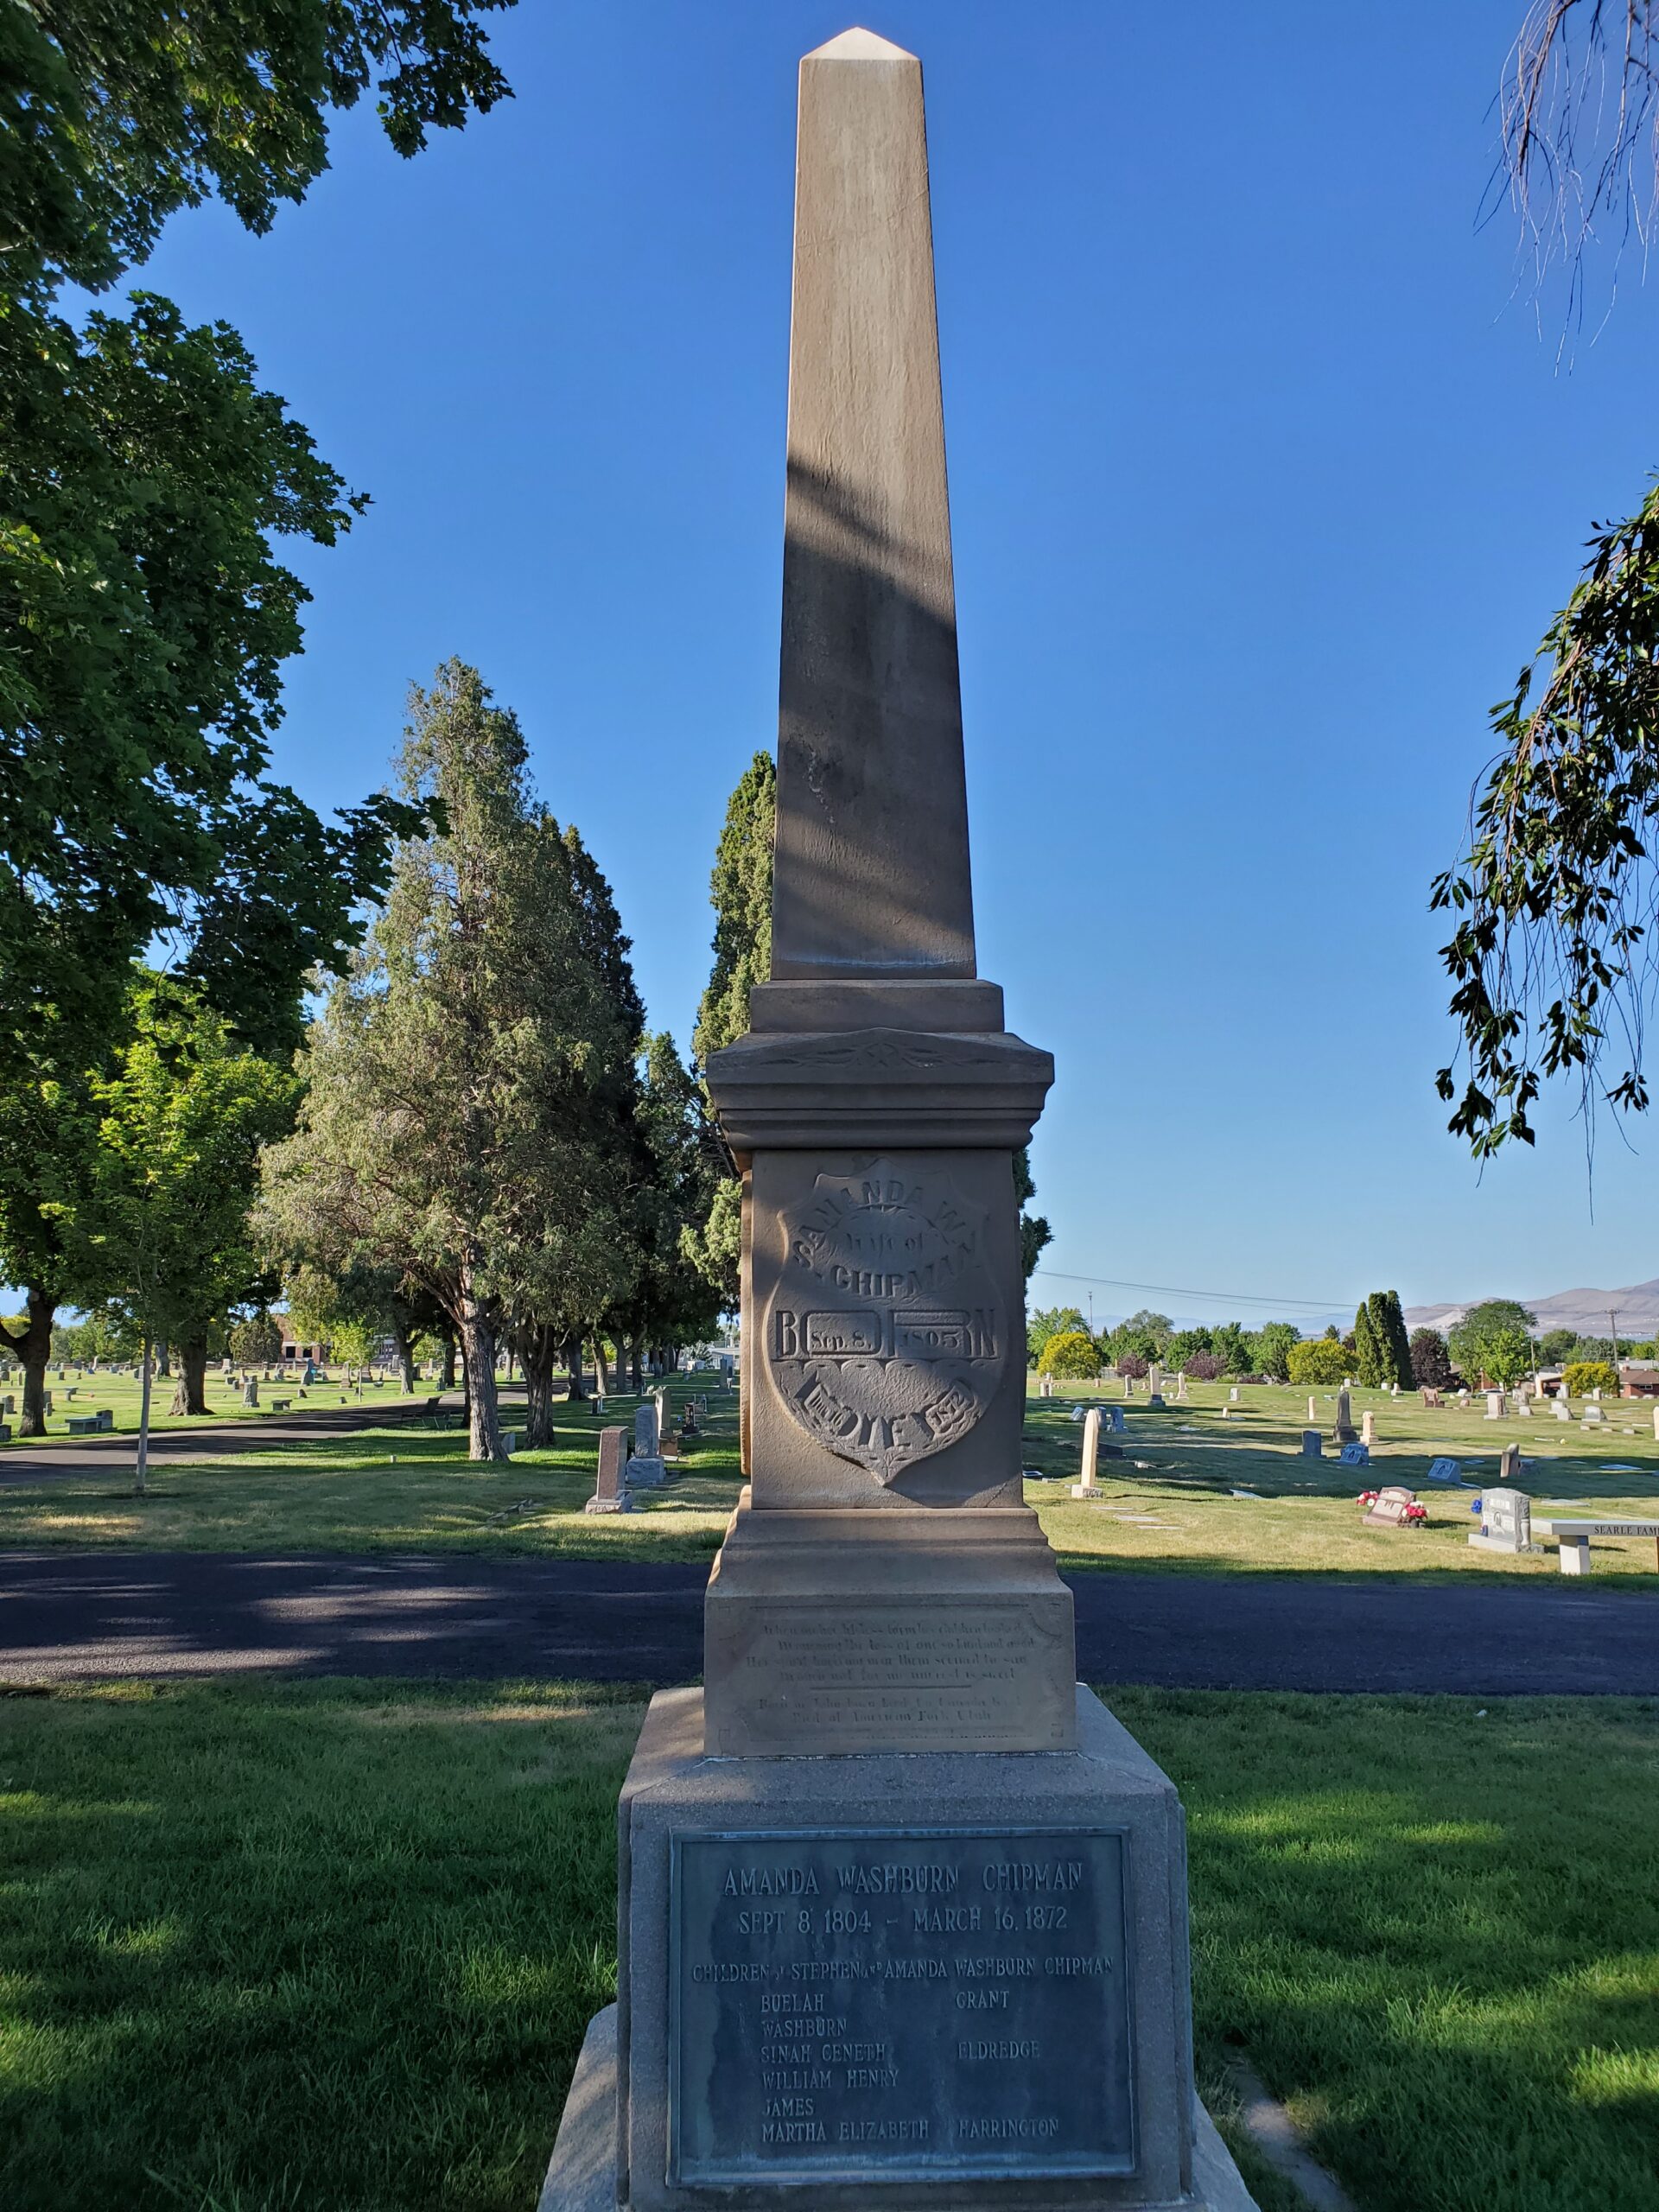 This large obelisk is a monument to the Chipman Family.